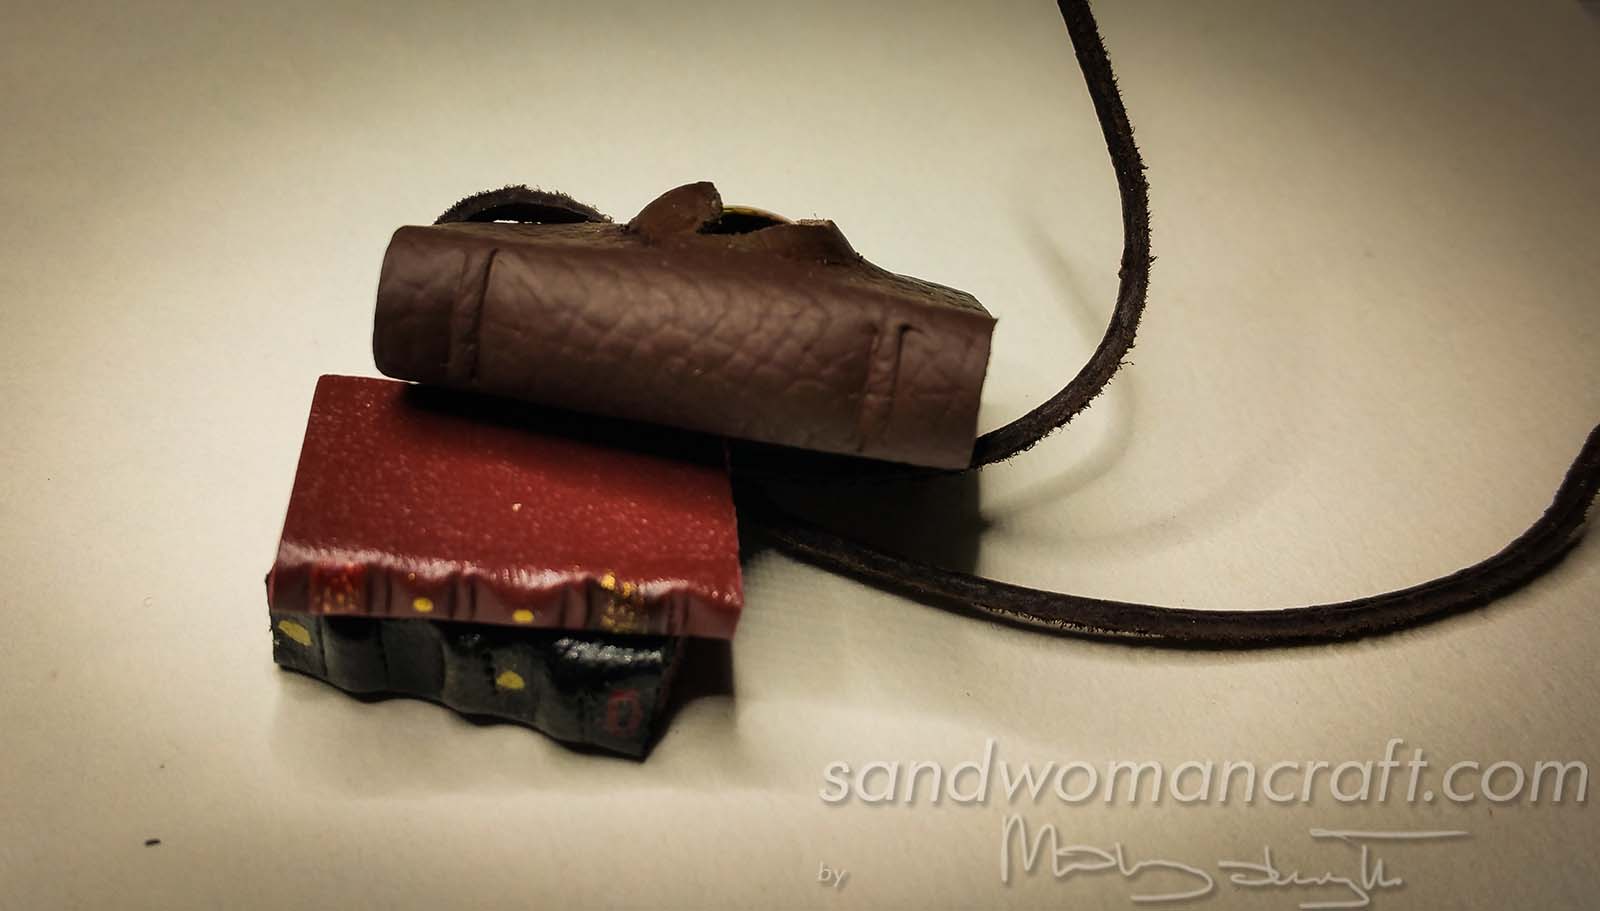 Miniature leather book with glass dragon's eye